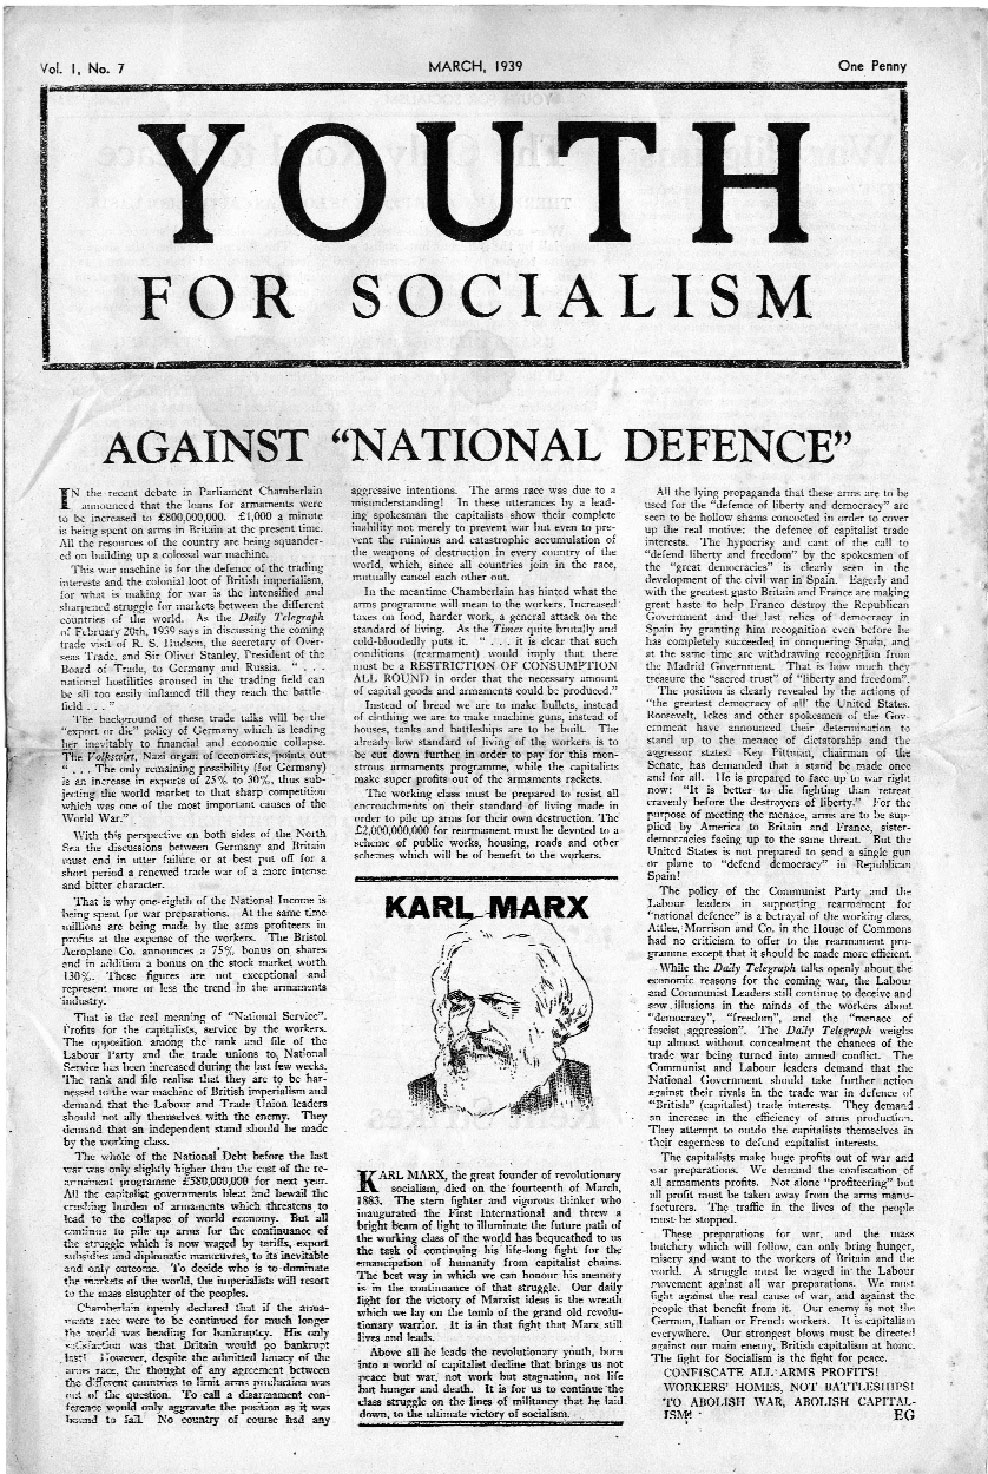 Youth For Socialism, March 1939, carrying the lead article <em>Against "national defence"</em> by Ted Grant